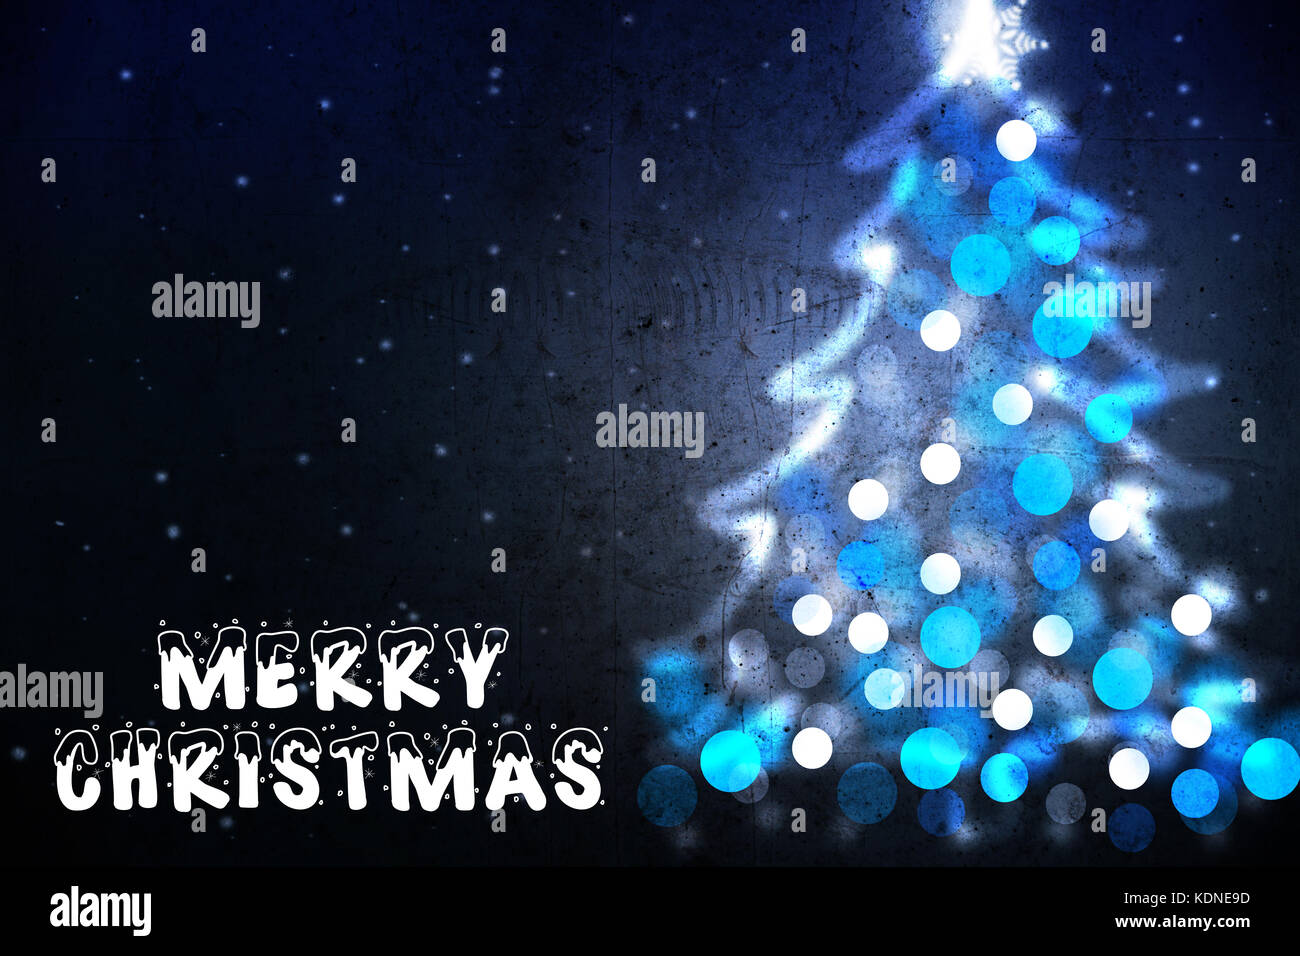 Merry Christmas wish on greeting card with Christmas tree silhouette from blue lights Stock Photo